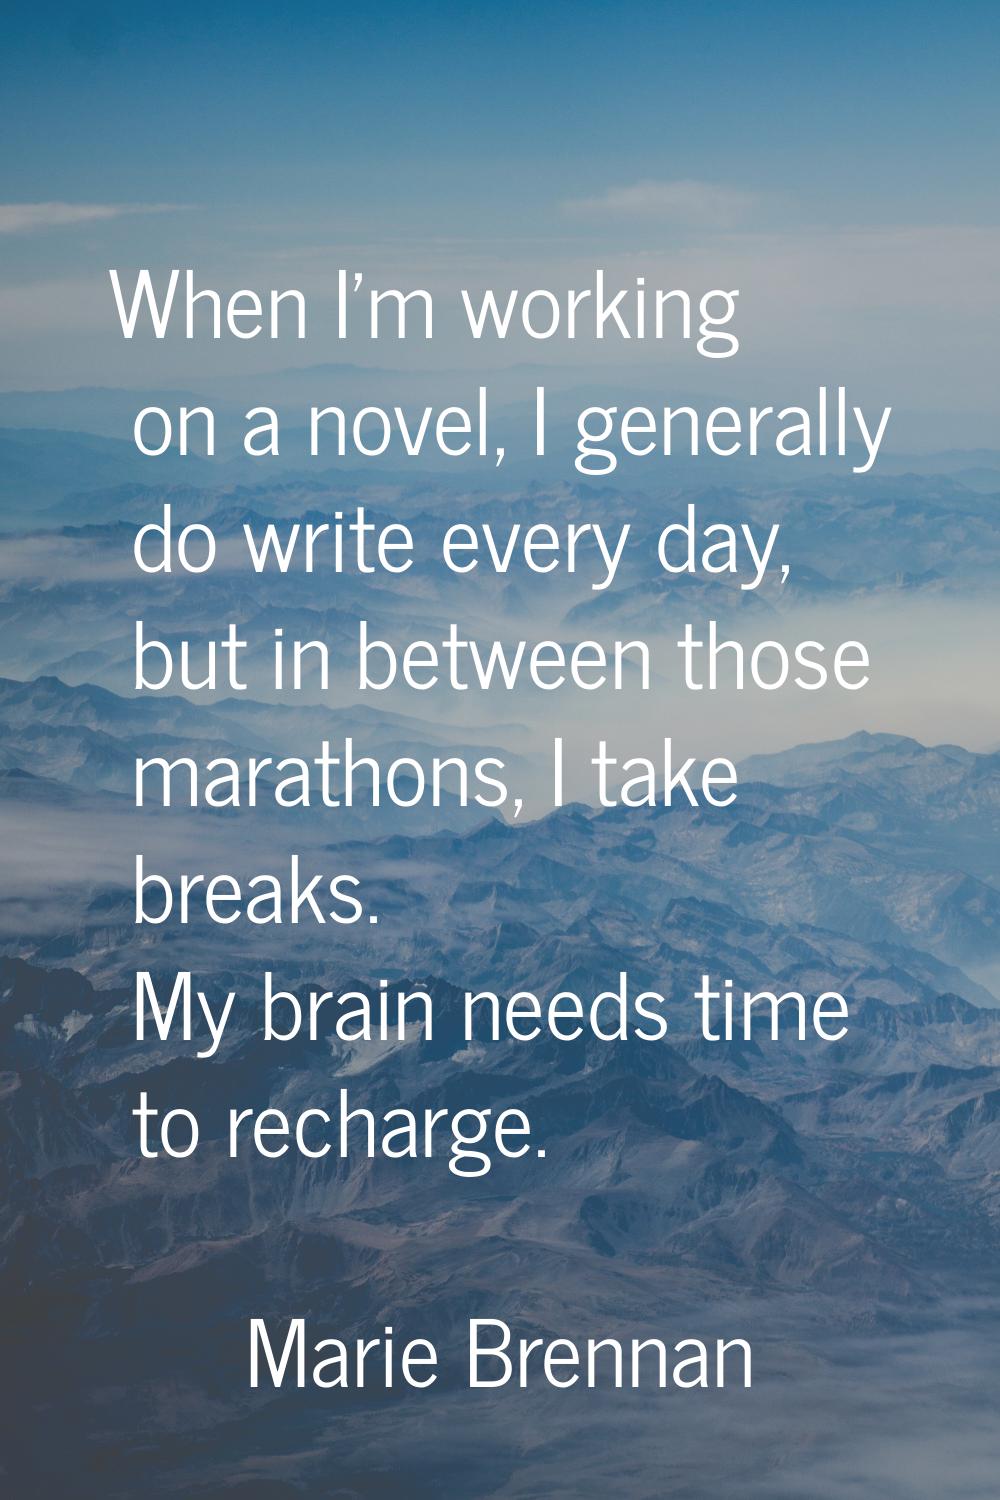 When I'm working on a novel, I generally do write every day, but in between those marathons, I take